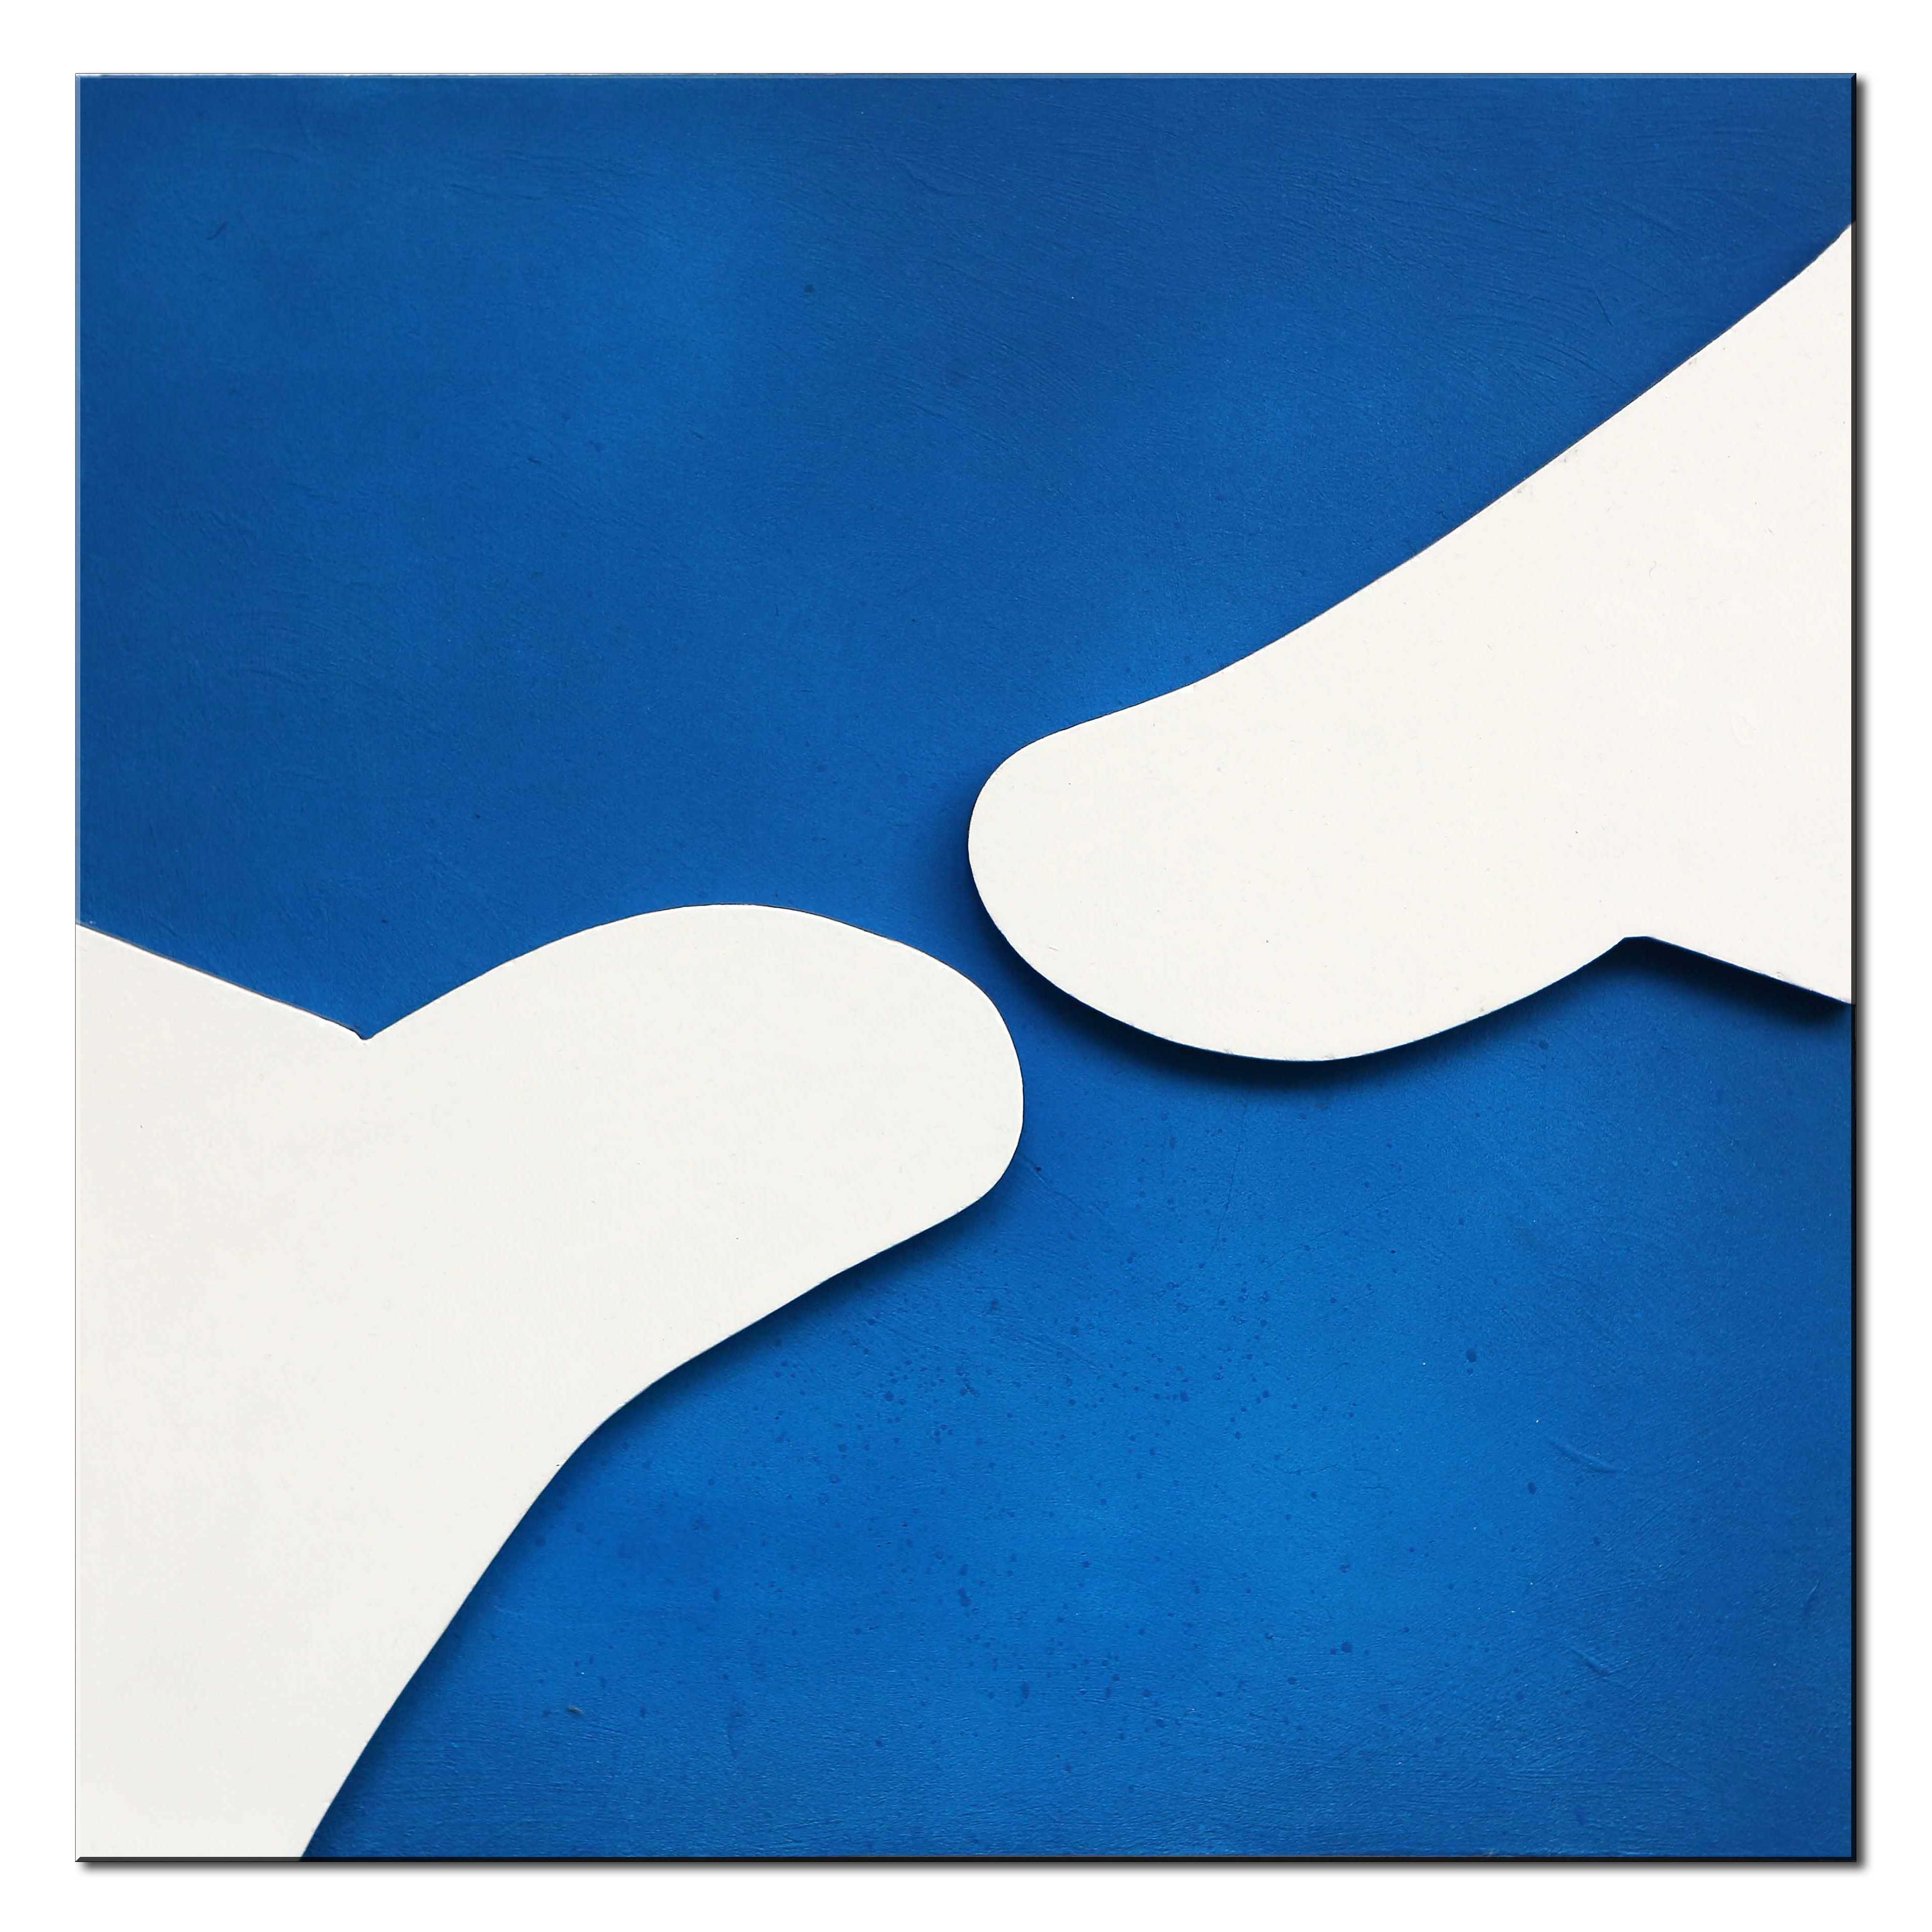 white shapes on blue background inspired by René Daniëls and Hans Arp